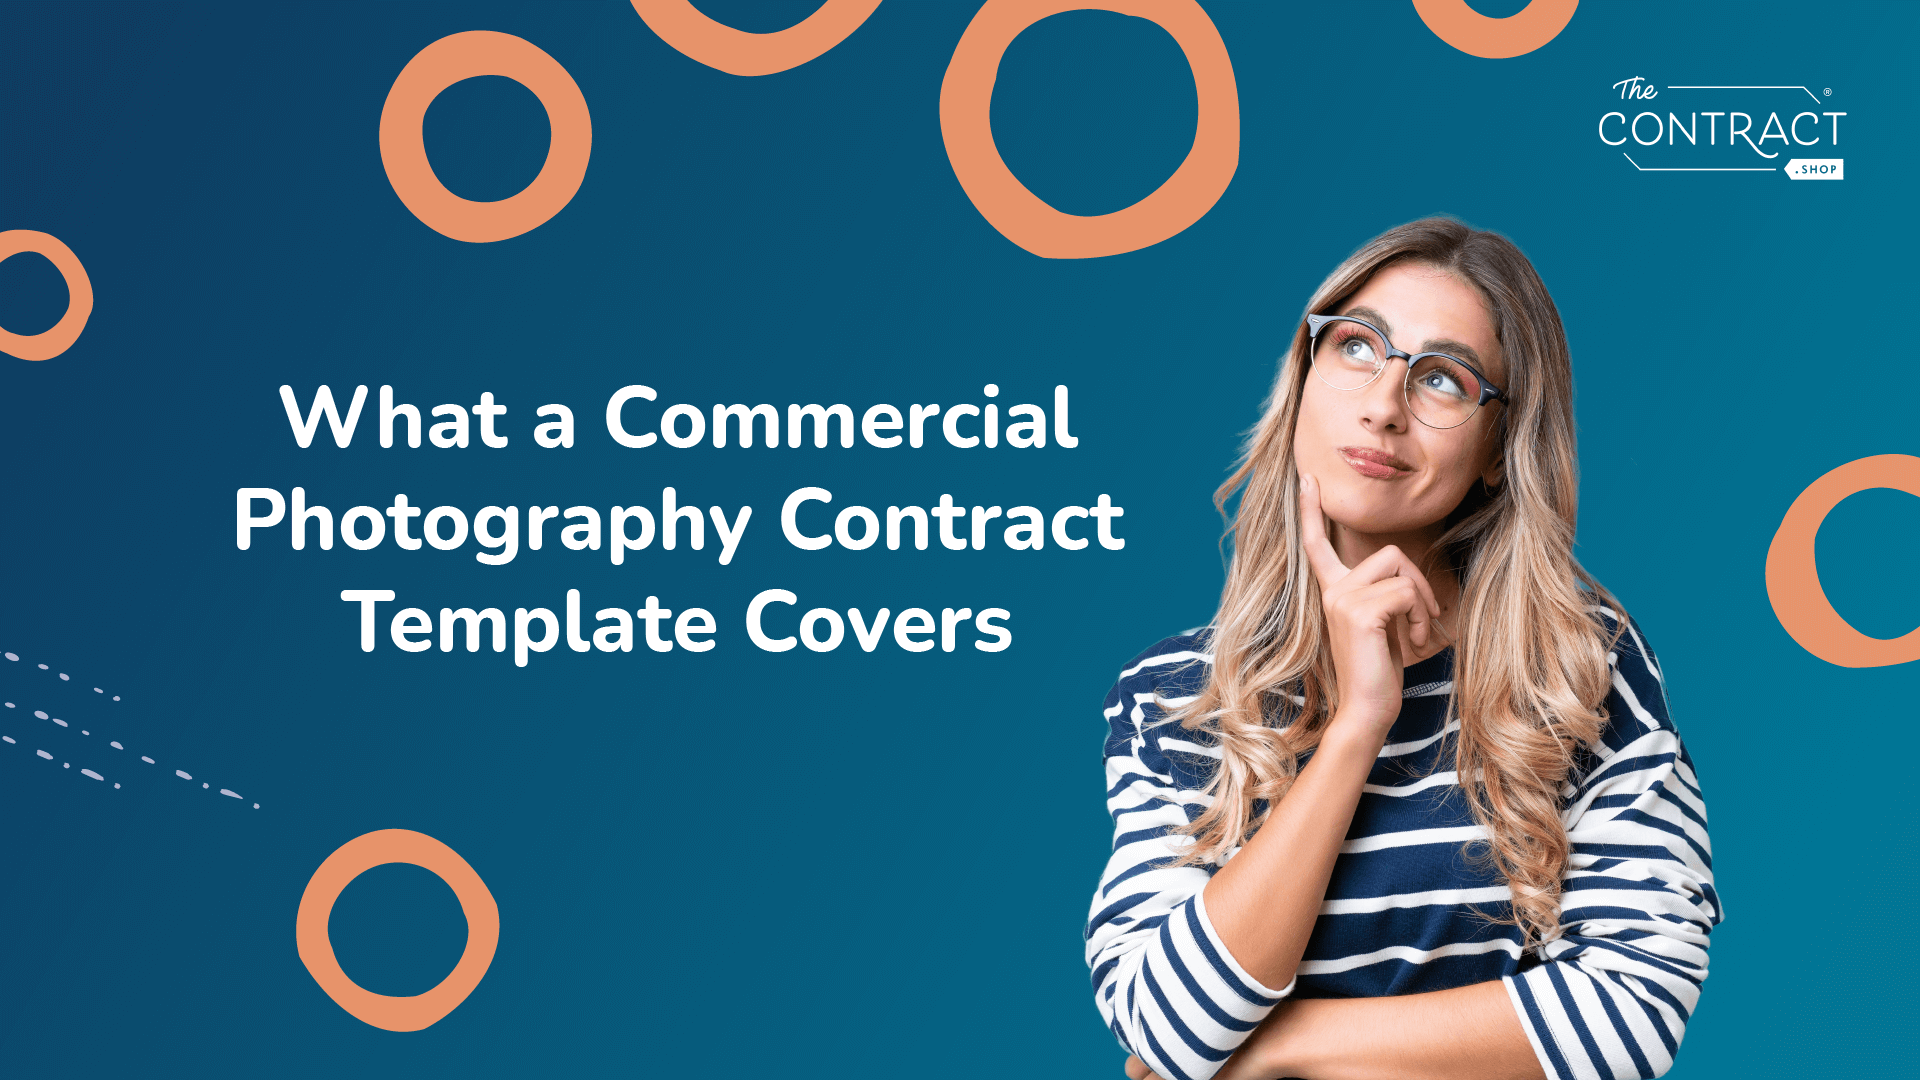 What a commercial photography contract template covers